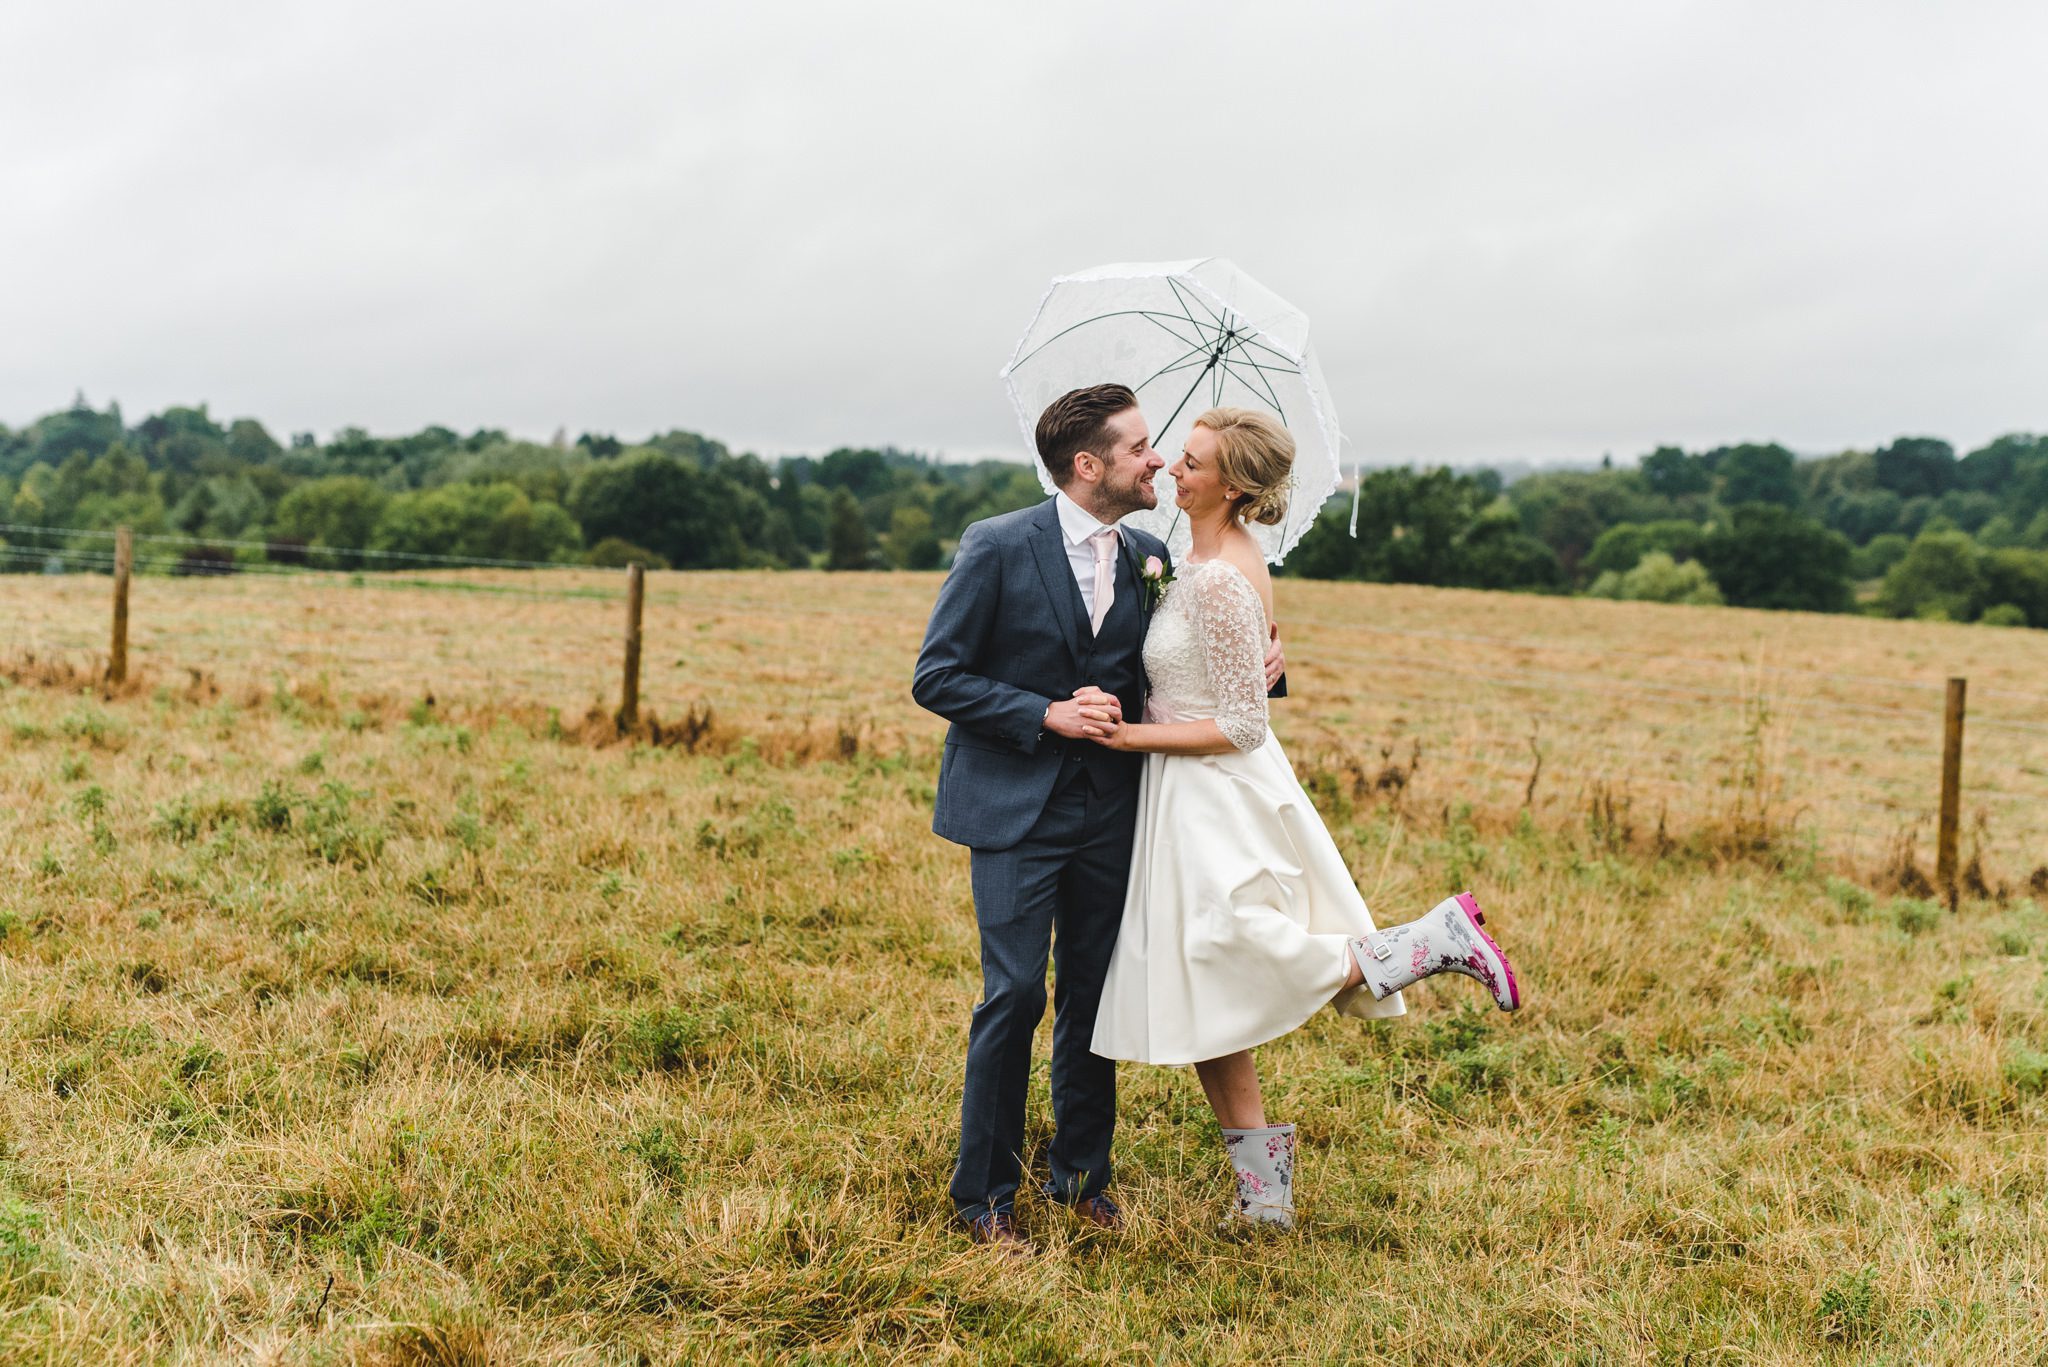 Windswept field photographs with a bride and groom